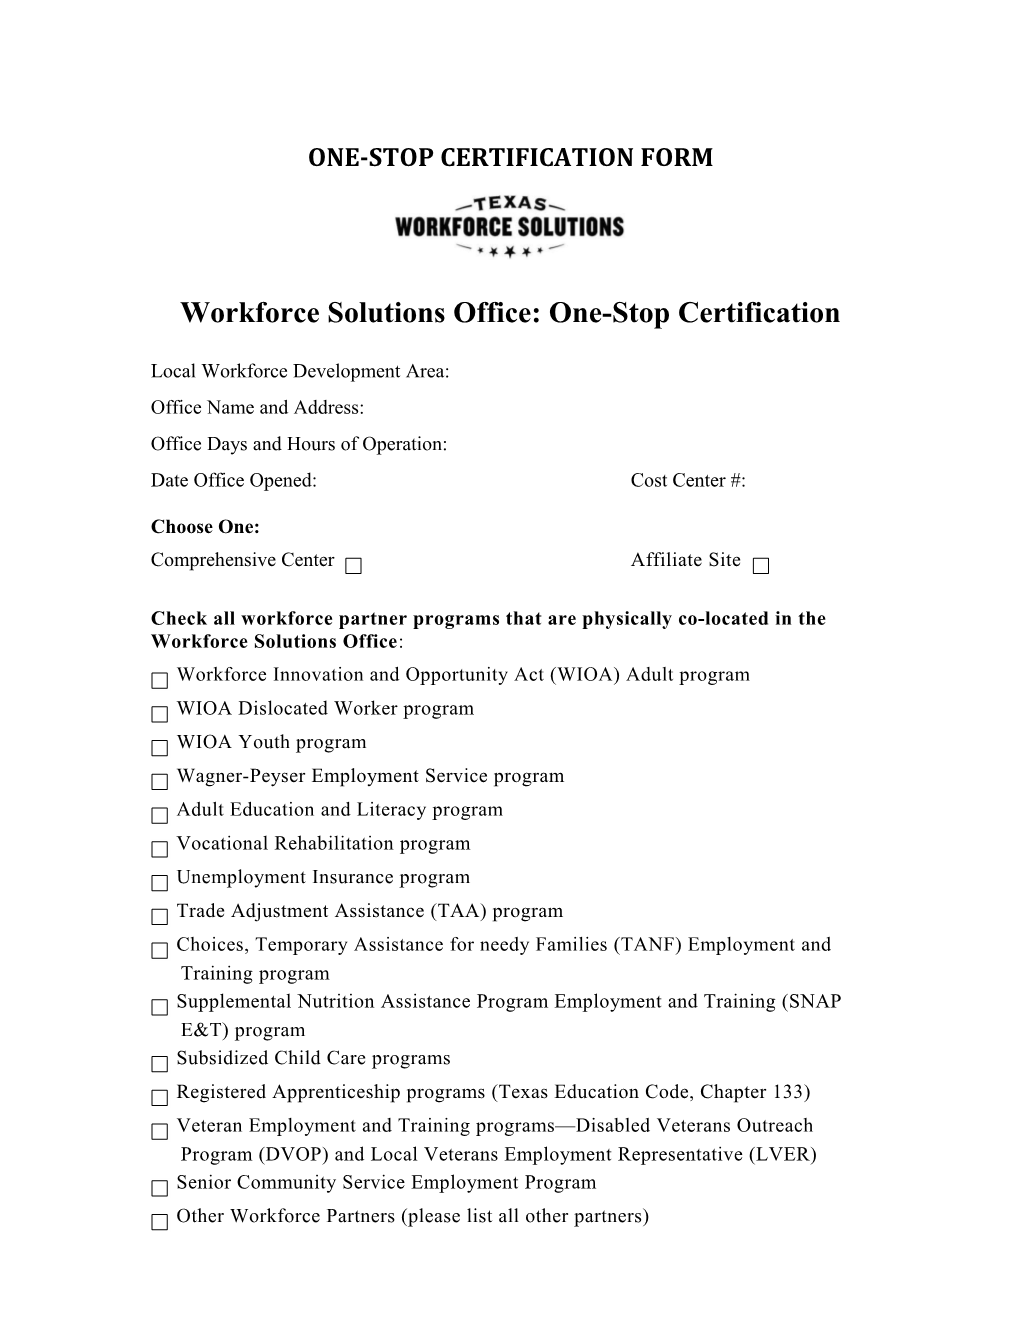 One-Stop Certification Form